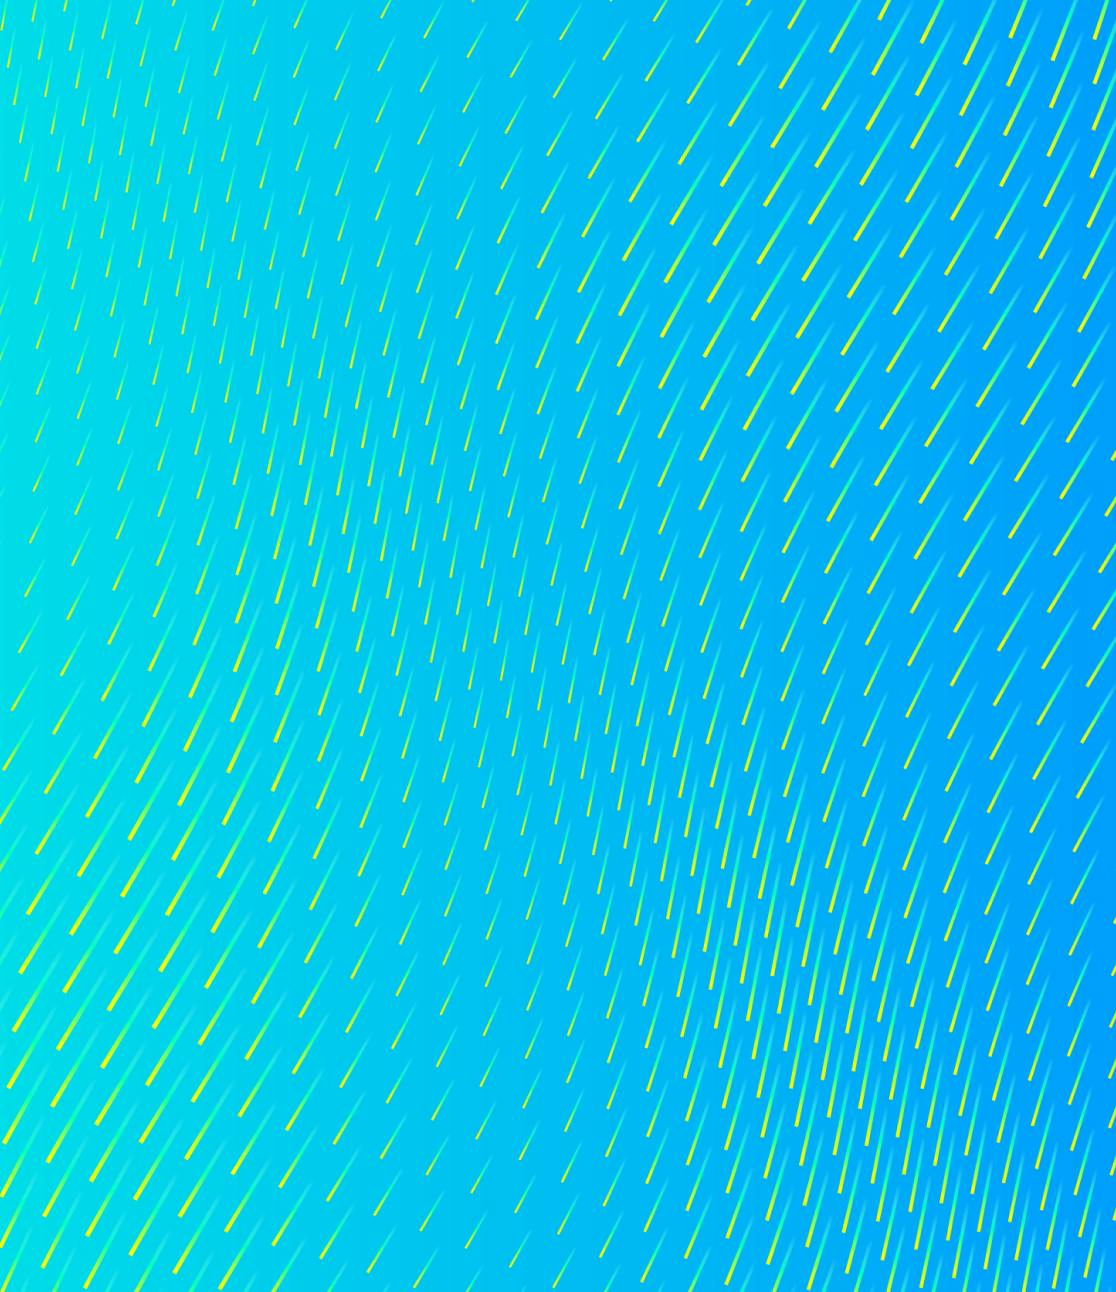 A digital rendering of many small yellow-green lines, repeated at varying angles on a cyan background. The many small lines create a visual affect of waves or movement.